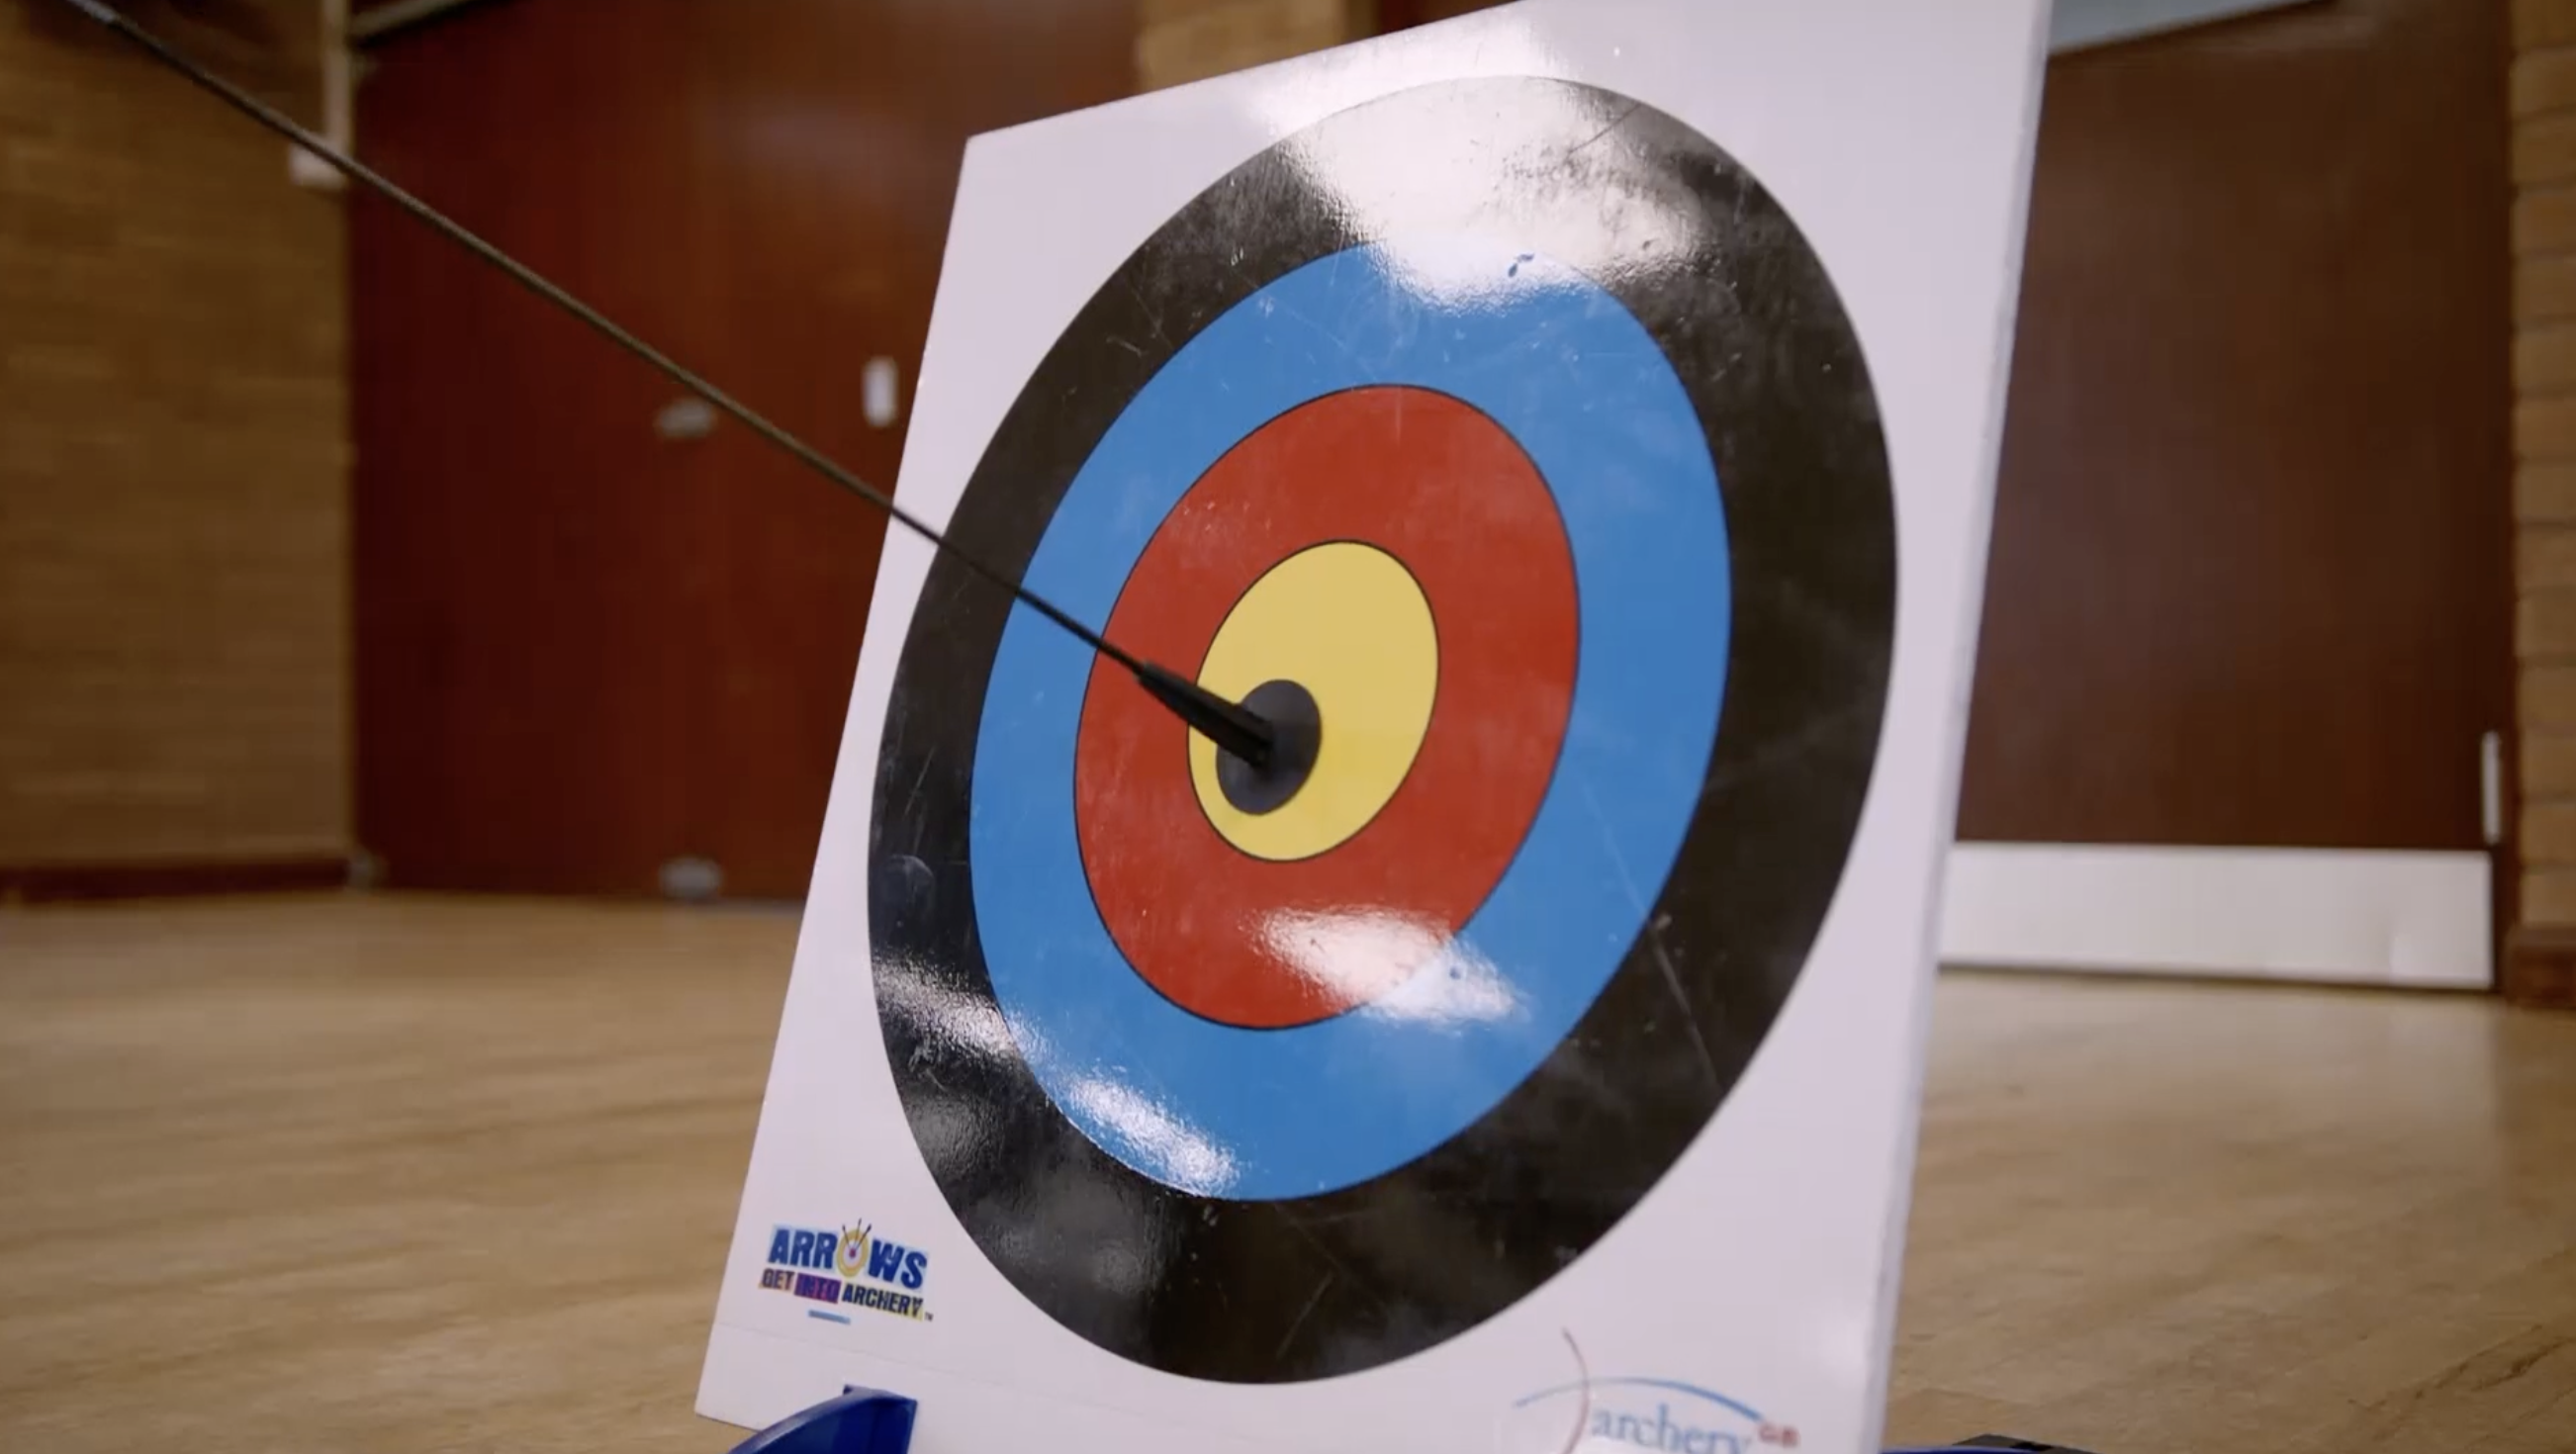 Arrows soft archery target with an arrow with a suction cup stuck on the centre